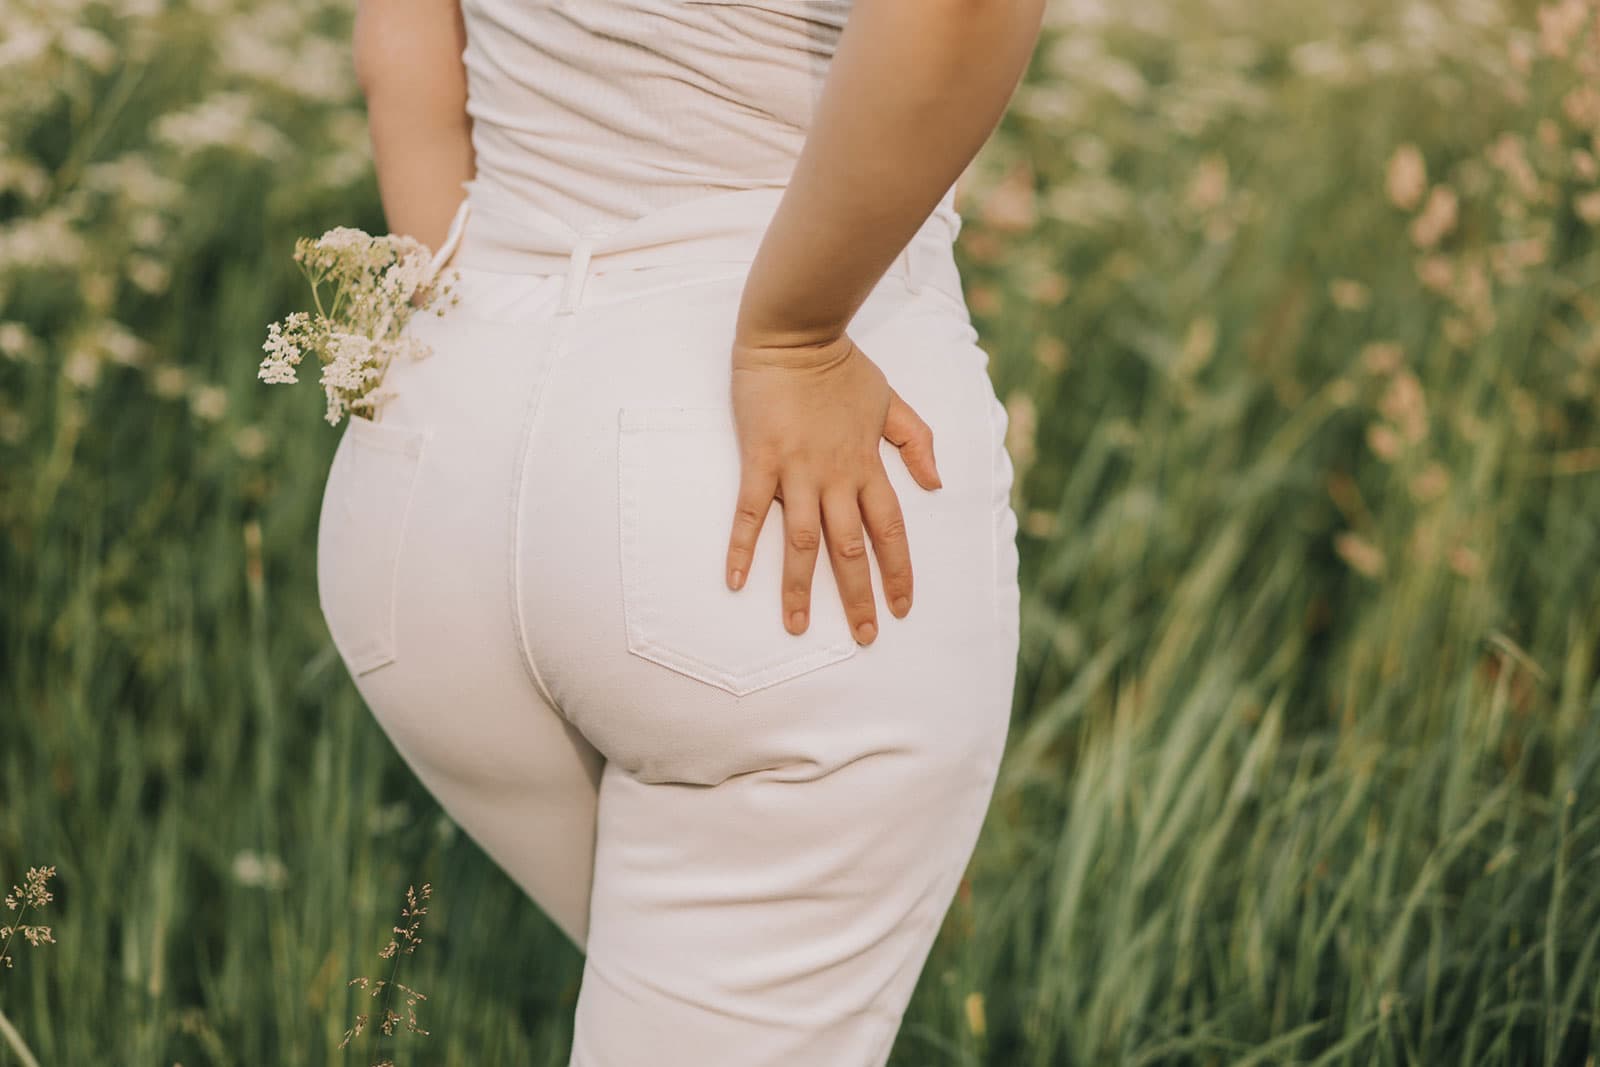 Image of a woman wearing light color denim standing in a field standing away from the camera. The image is cropped to focus on the woman's buttocks.